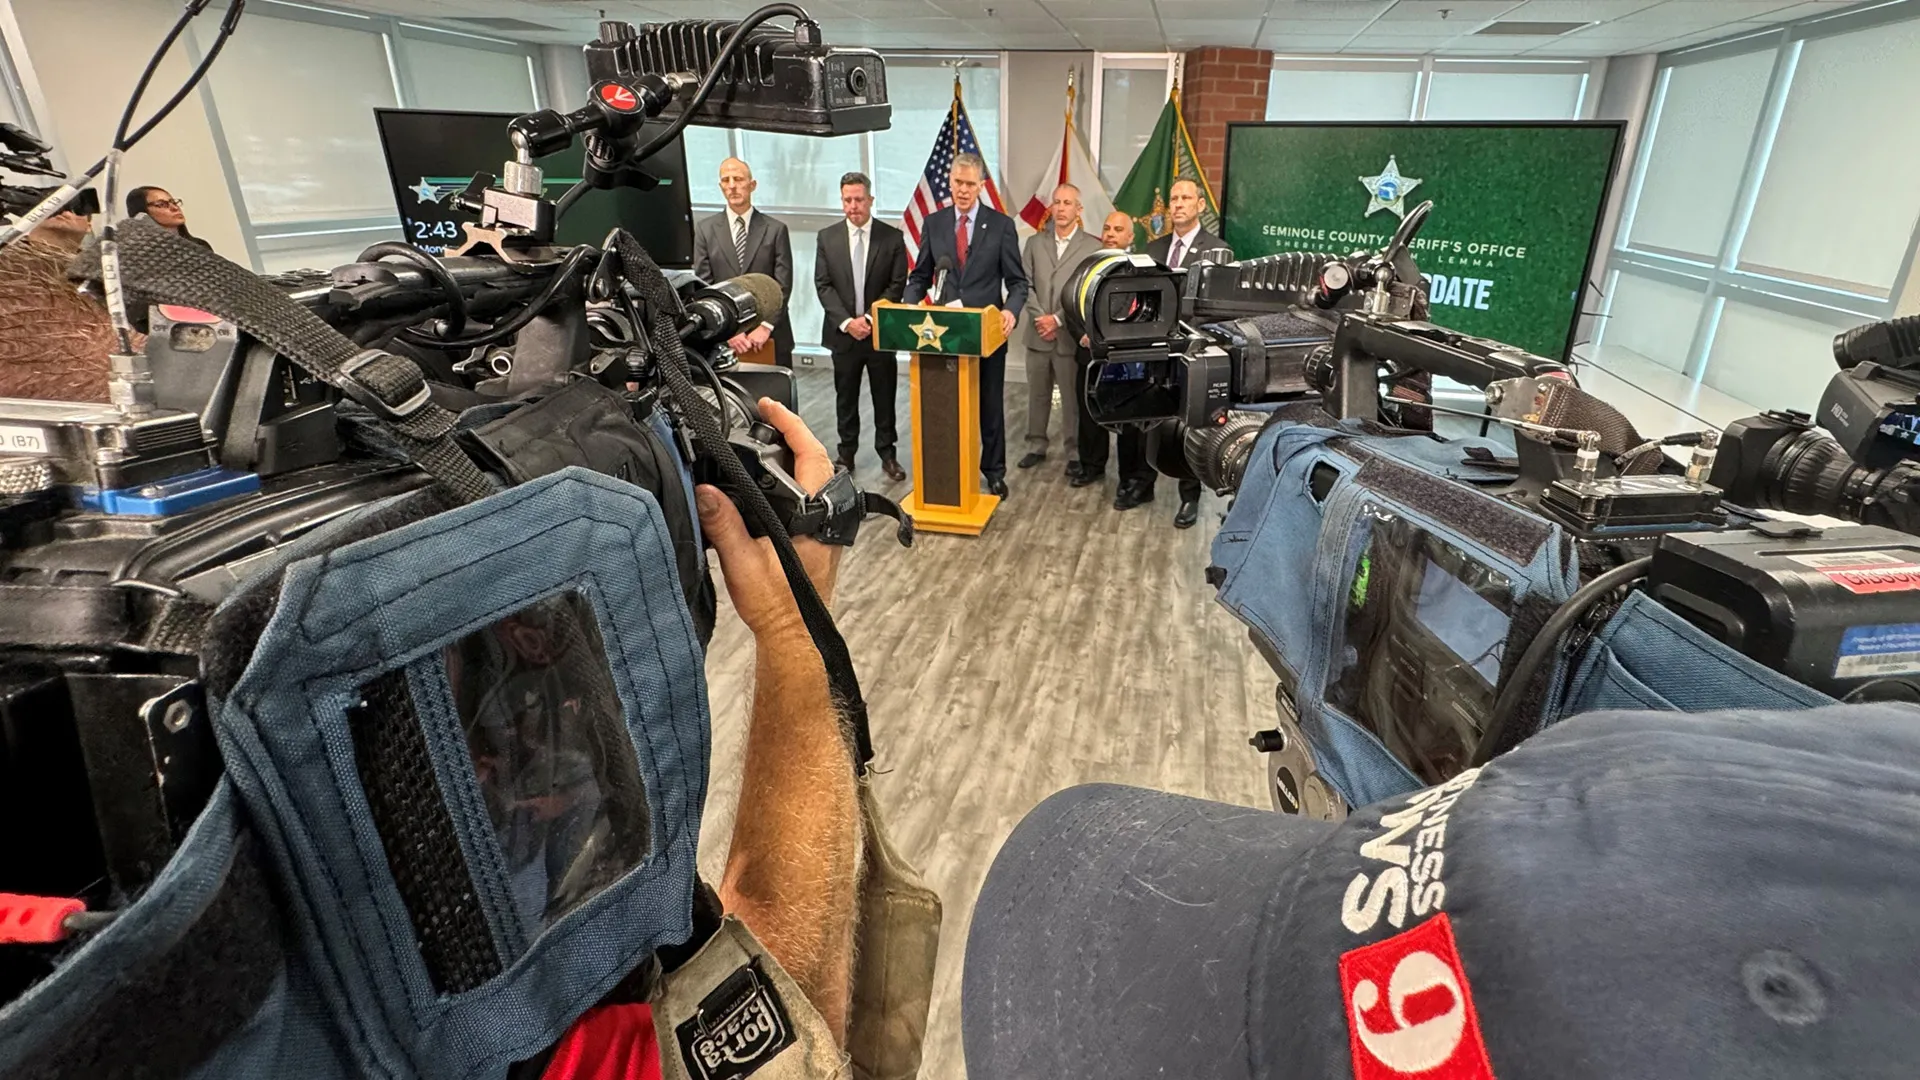 During a press conference at the Seminole County Sheriff’s Office, U.S. Attorney for the Middle District of Florida Roger B. Handberg announced the filing of a complaint charging Jordonish Garcia Torres, 28, of Orlando.